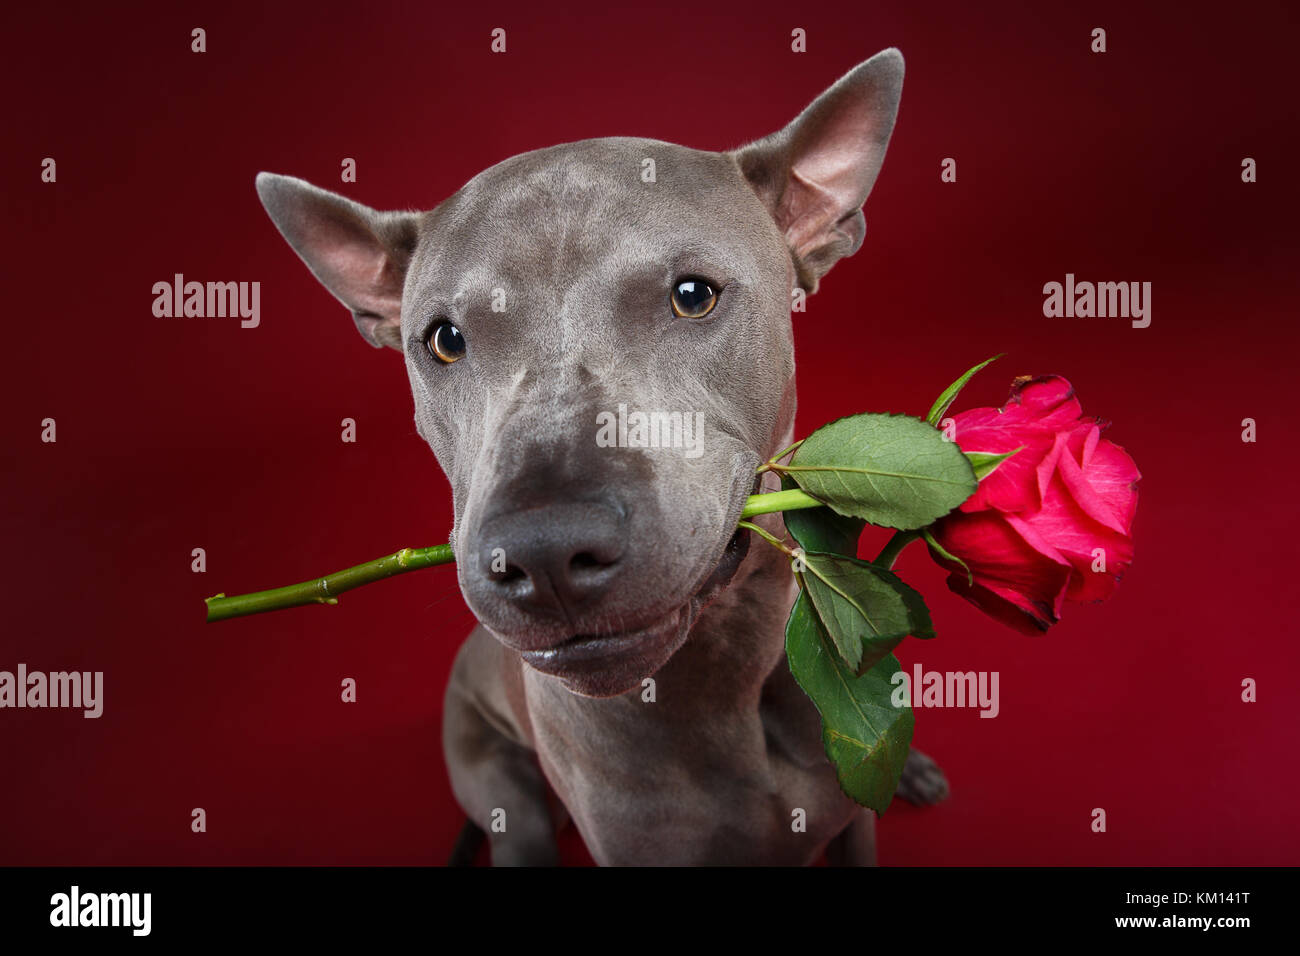 dog holding rose in mouth Stock Photo